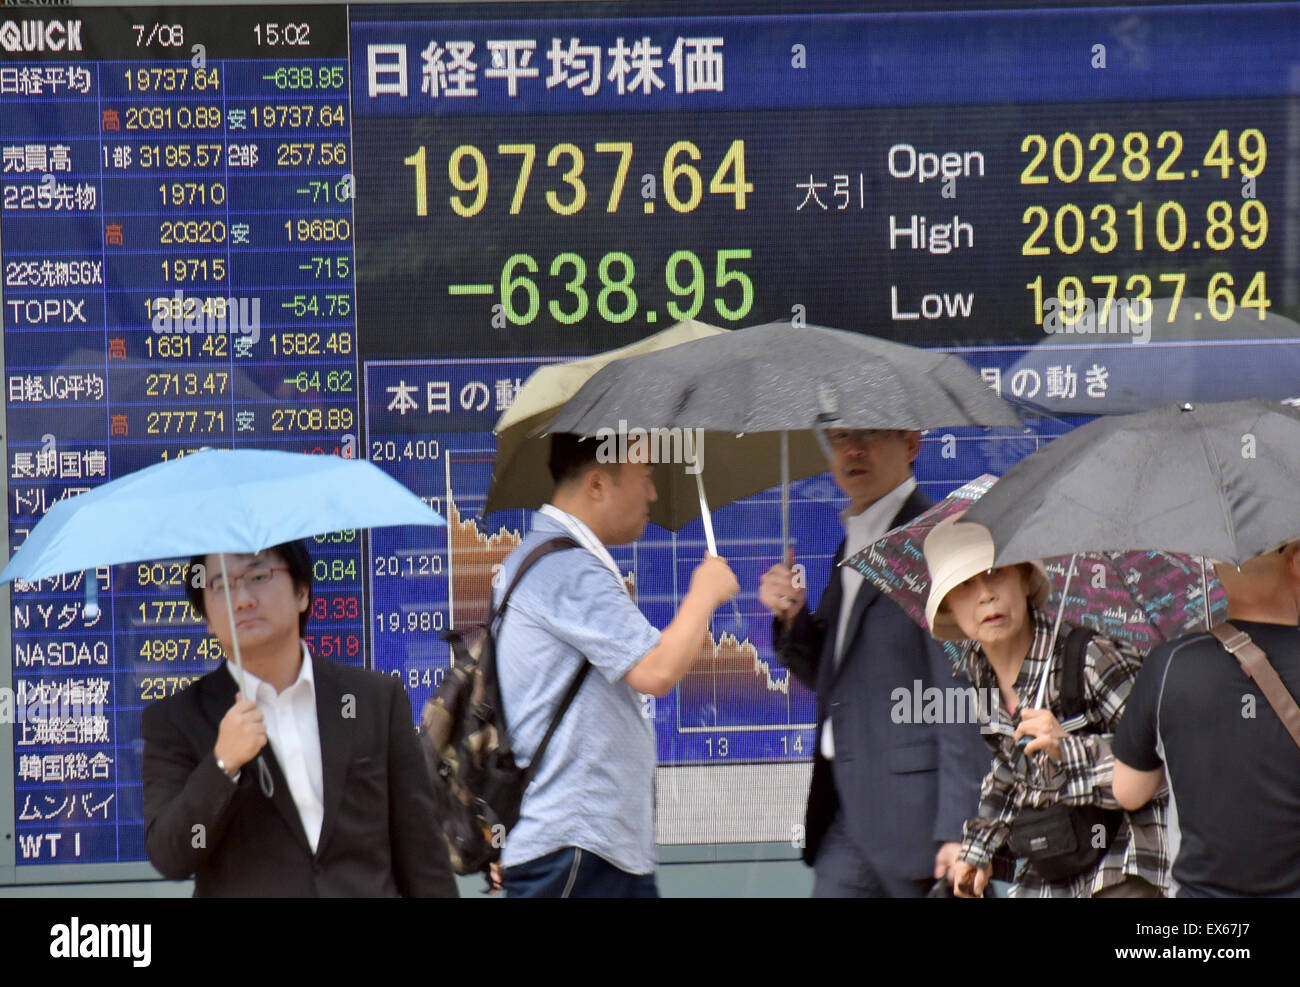 Tokyo, Japan. 8th July, 2015. Japan's stocks sink below the psychologically important 20,000 mark on Wednesday, July 8, 2015, on the Tokyo Stock Exchange market to a seven-week low on concerns about a meltdown in Chinese shares and the Greece debt crisis.The 225-issue Nikkei Stock Average fell to as low as 19,737.64, its lowest level since May 18. Credit:  Natsuki Sakai/AFLO/Alamy Live News Stock Photo